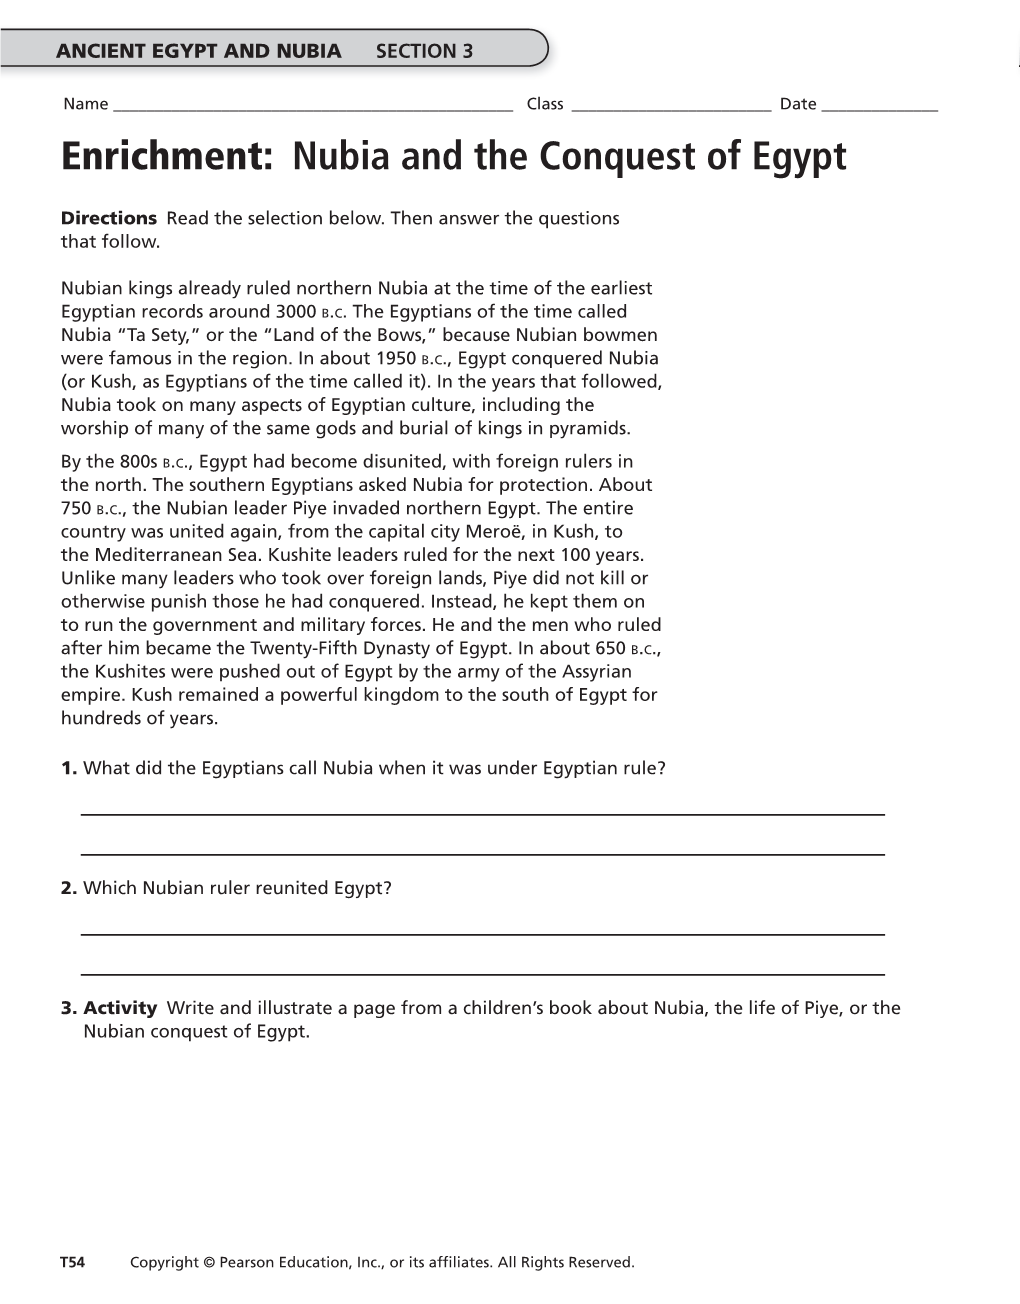 Enrichment: Nubia and the Conquest of Egypt